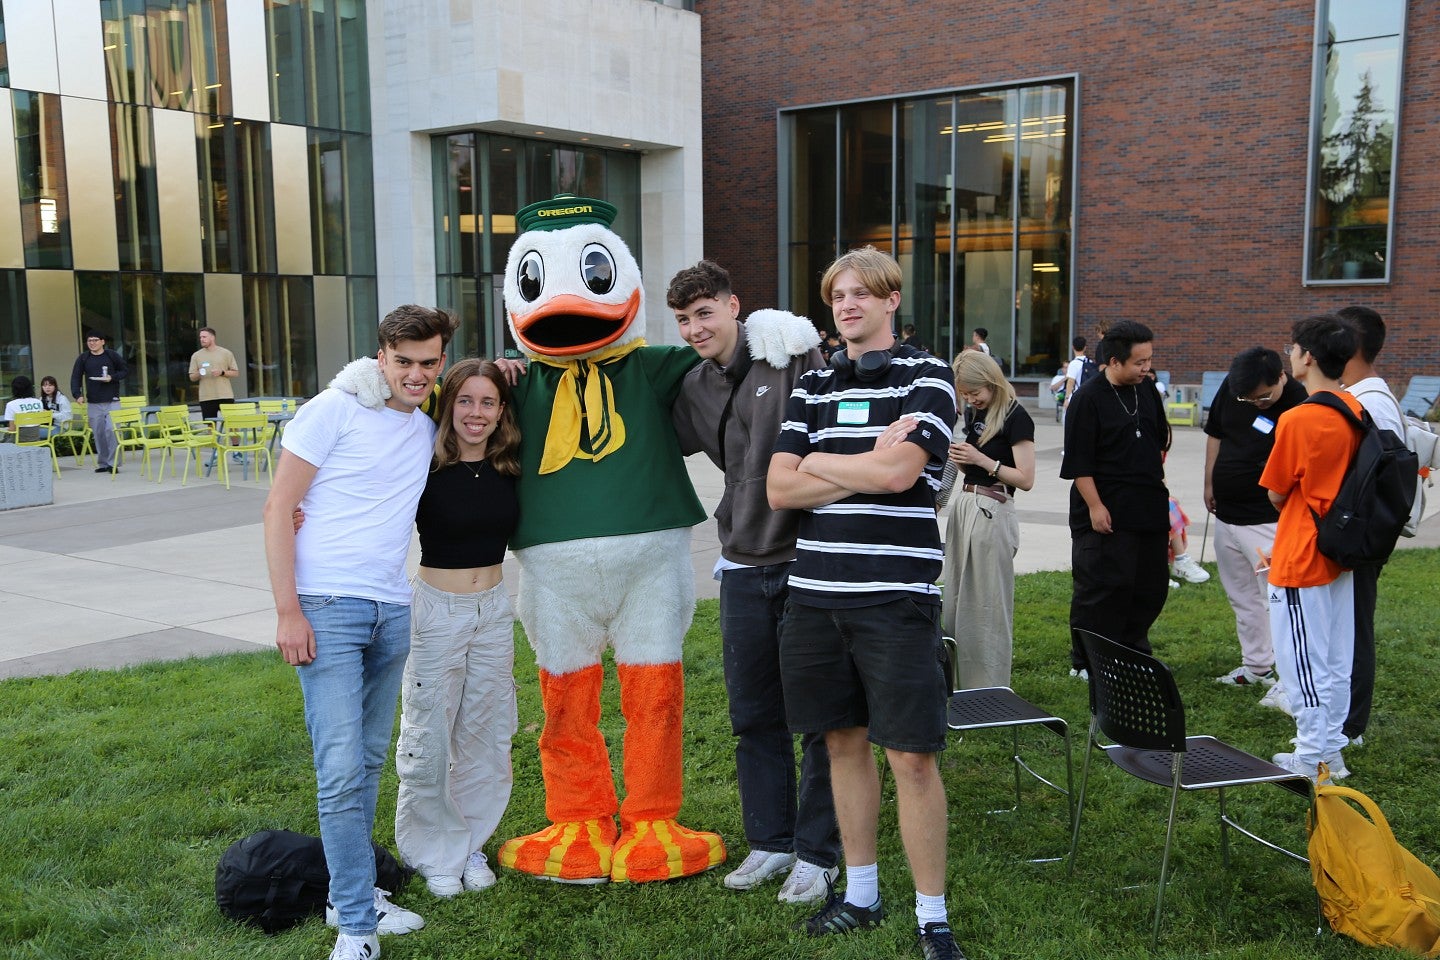 The Oregon Duck mascot with a group of international students on campus